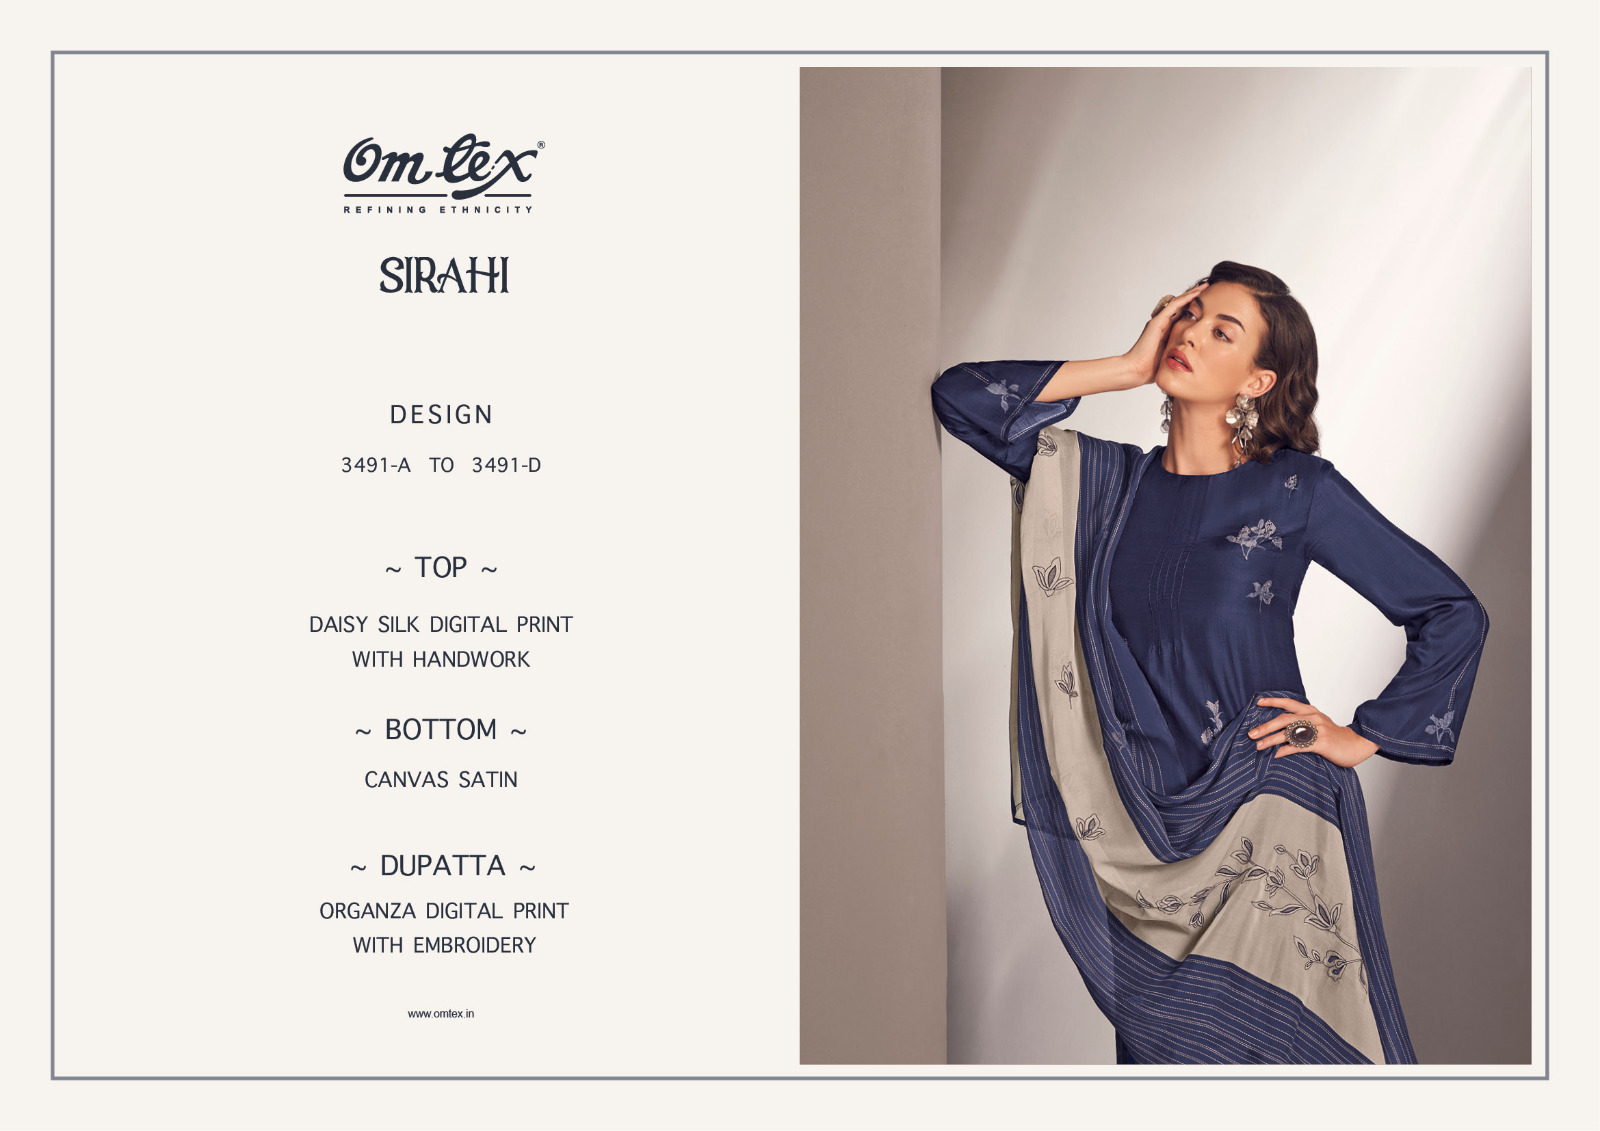 Omtex Sirathi collection 1